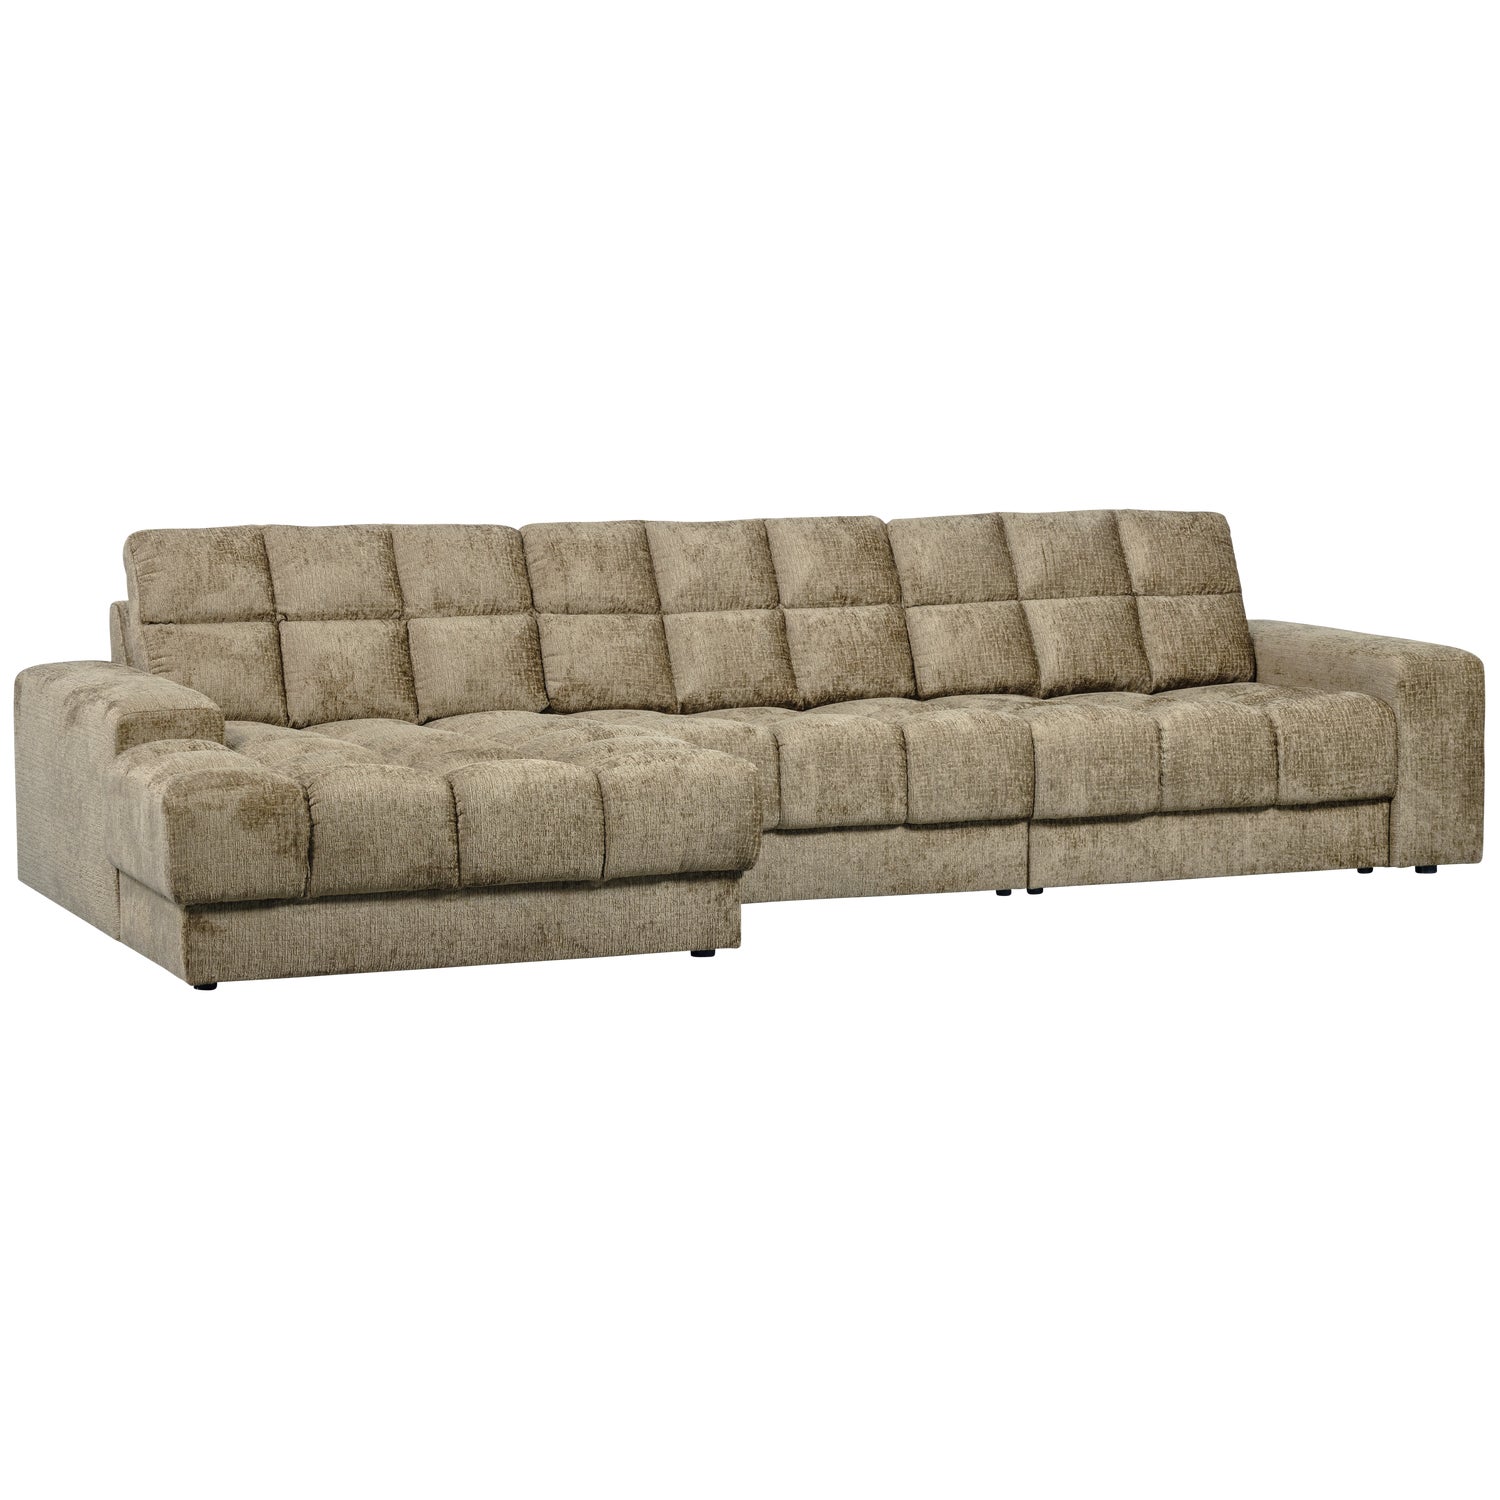 379012-WH-03_VS_WE_Second_date_chaise_longue_links_structure_velvet_wheatfield.png?auto=webp&format=png&width=1500&height=1500